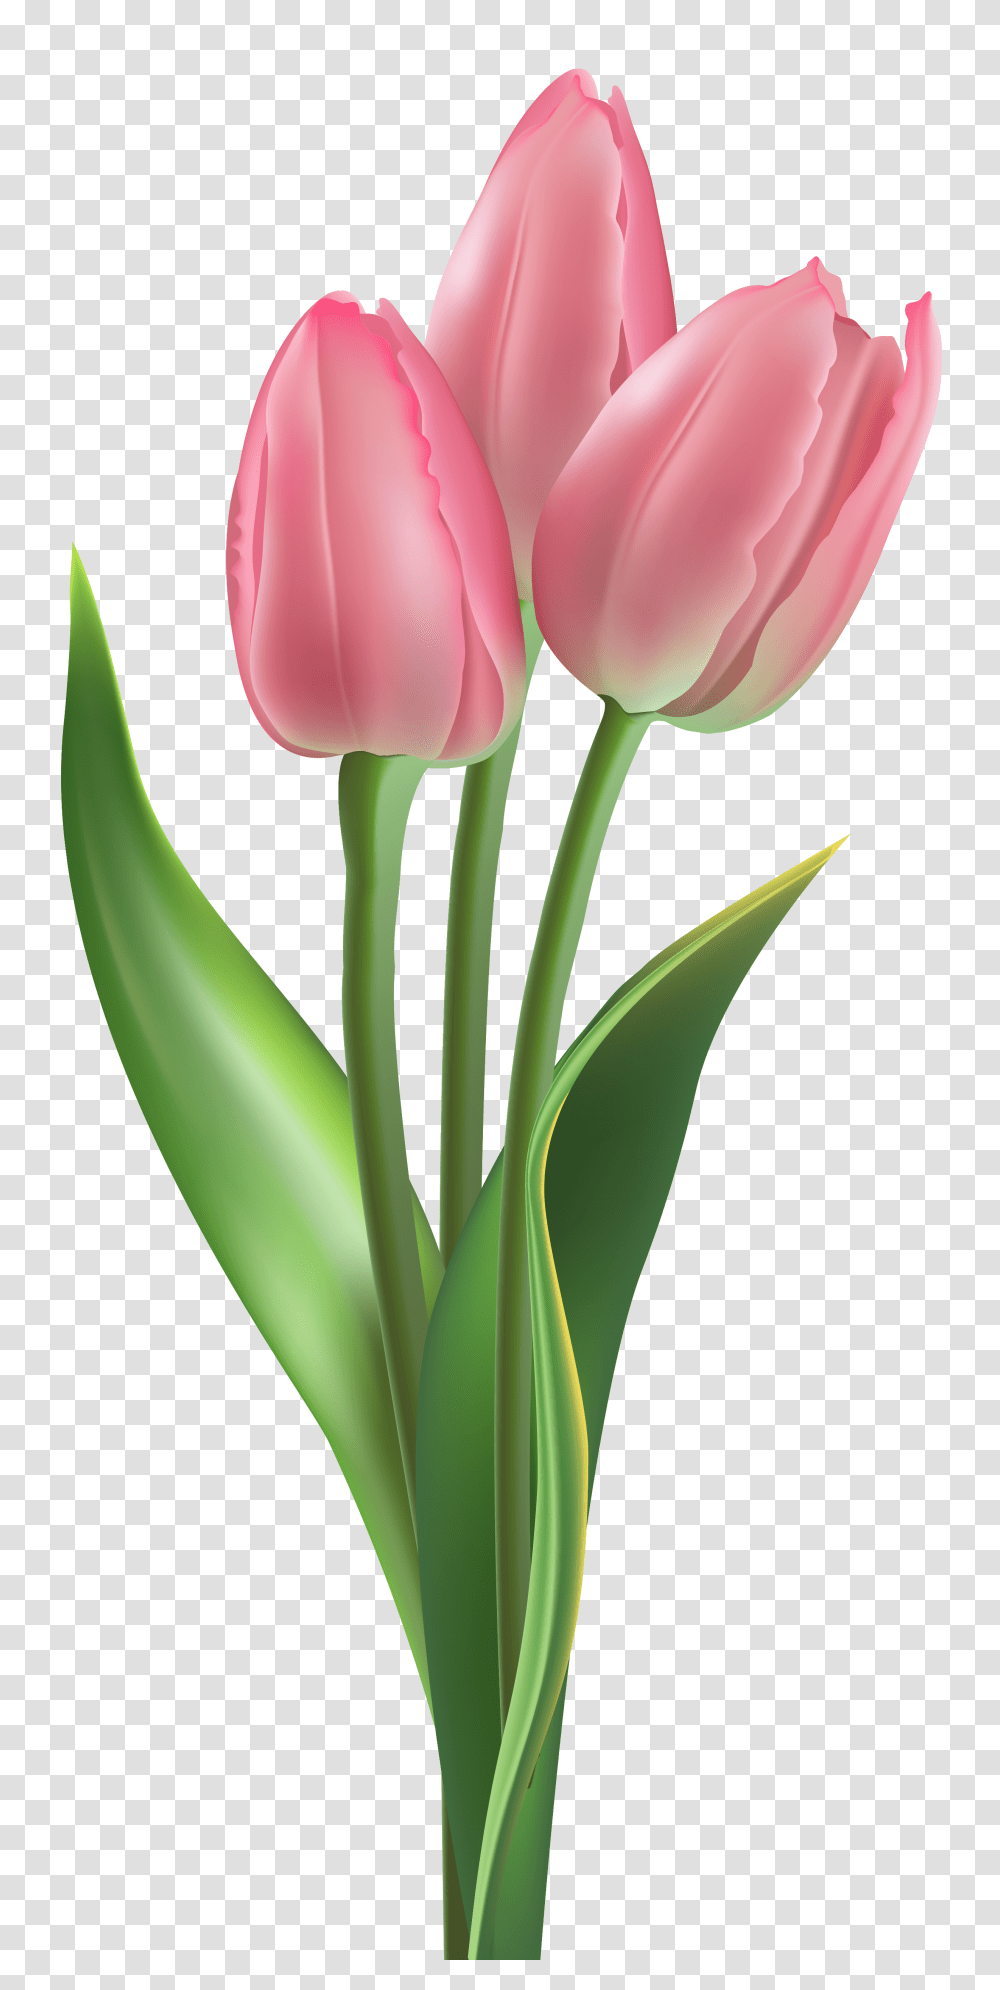 Soft Pink Tulips Clipart Image Pink Tulip Flower, Plant, Blossom Transparent Png